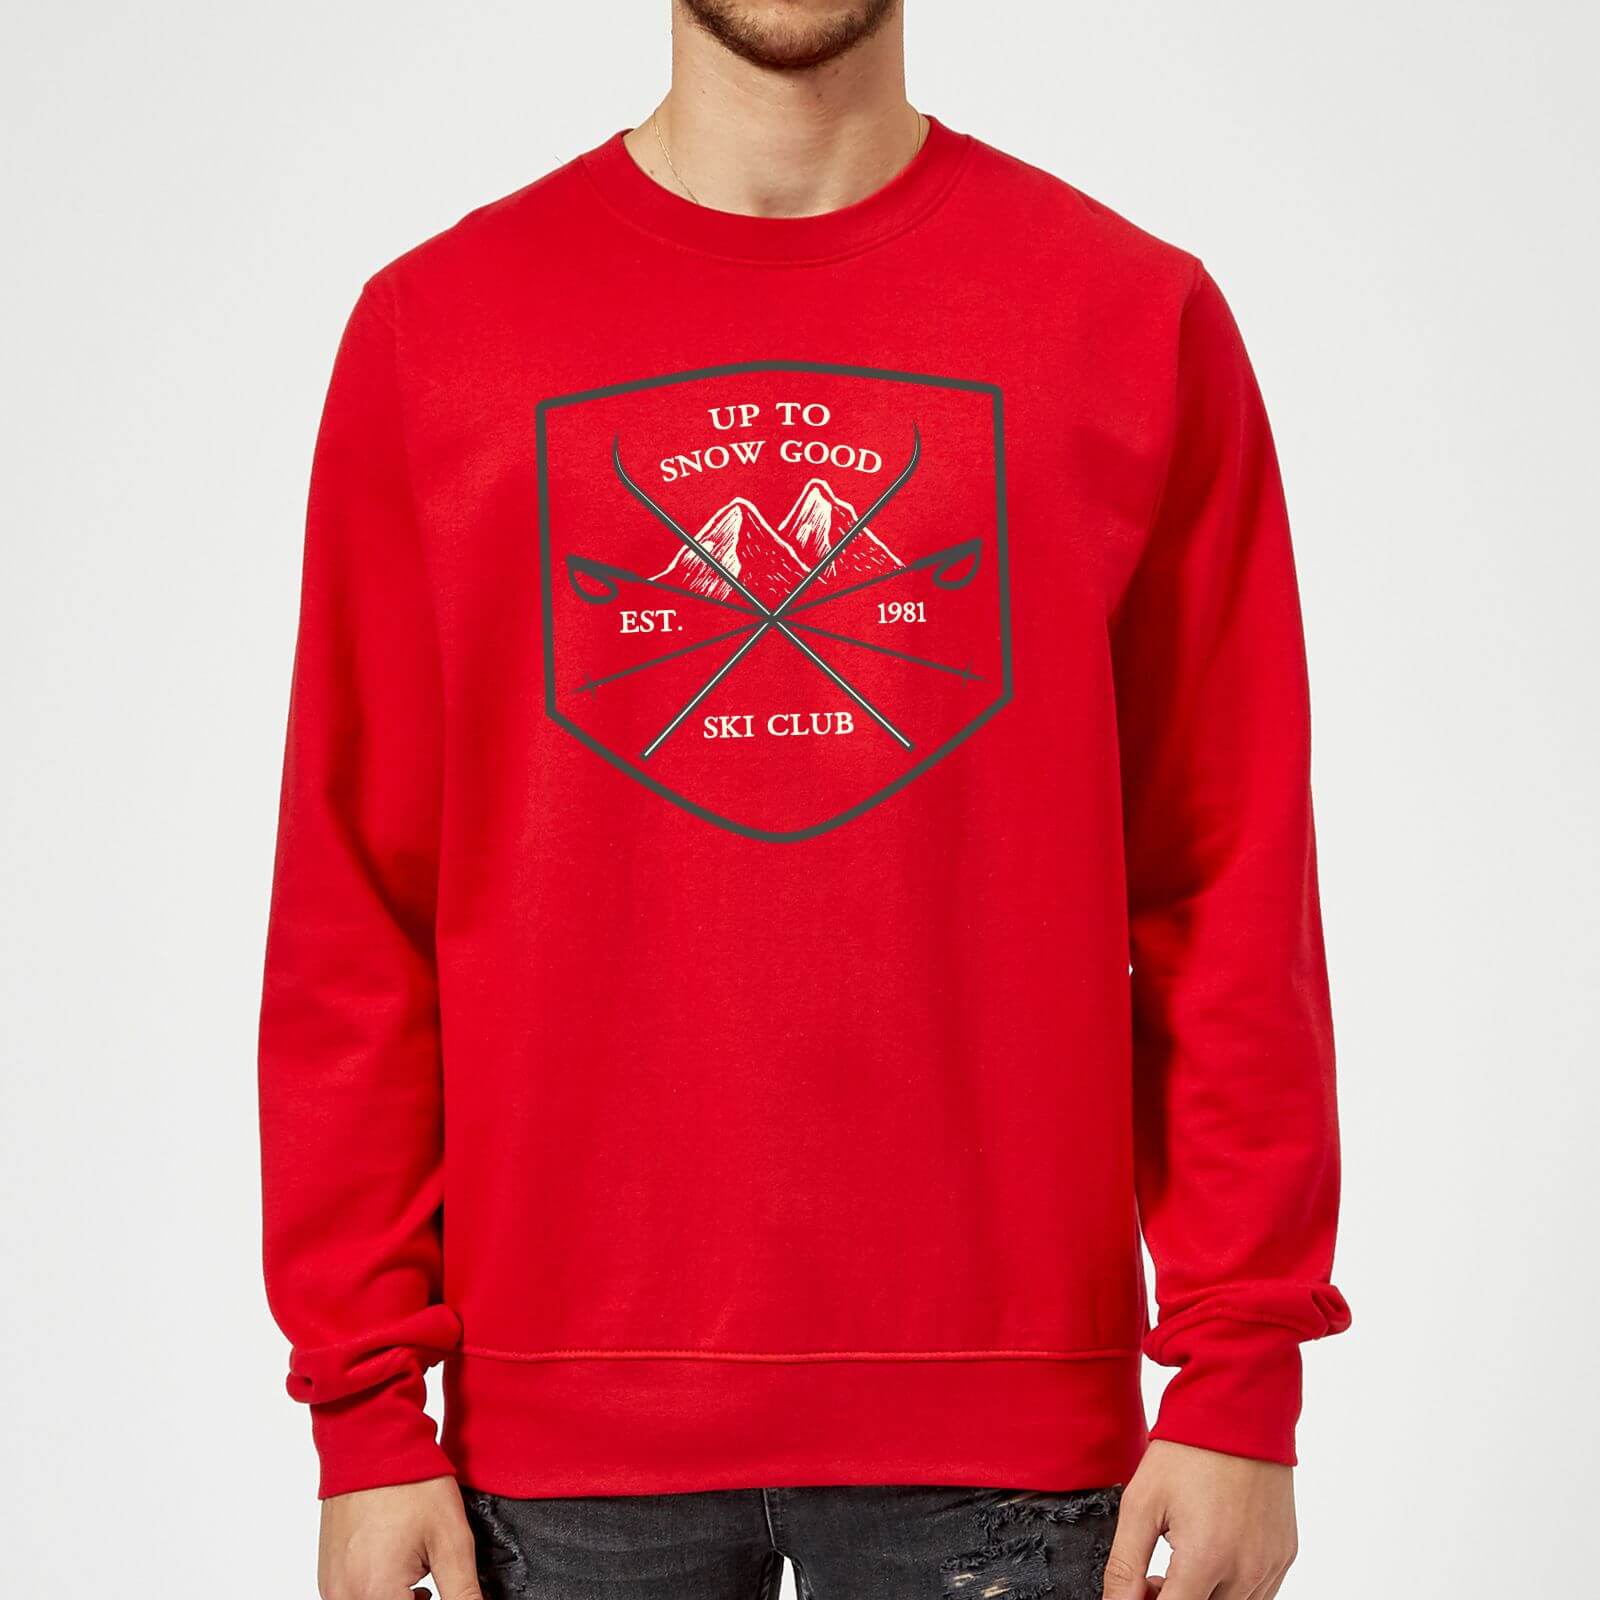 Up To Snow Good Christmas Sweatshirt - Red - M - Red